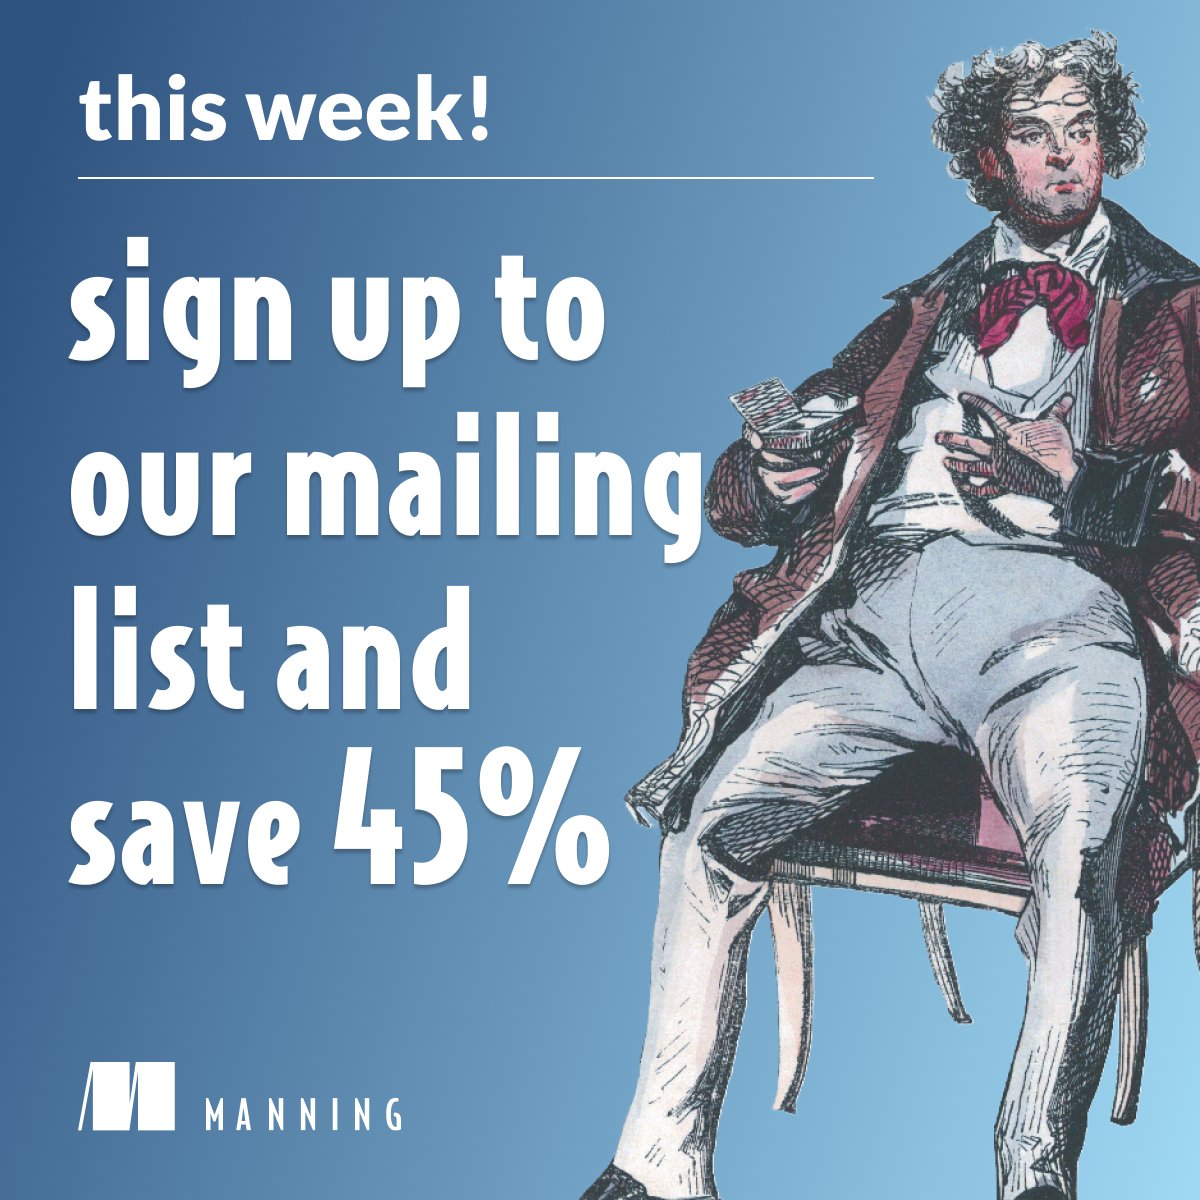 🌟 THIS WEEK - Sign up and save! 🌟 Get 42% off all eBooks, liveProjects, and liveVideos by registering for our mailing list @ mng.bz/X1XM #ManningBooks #LearnwithManning